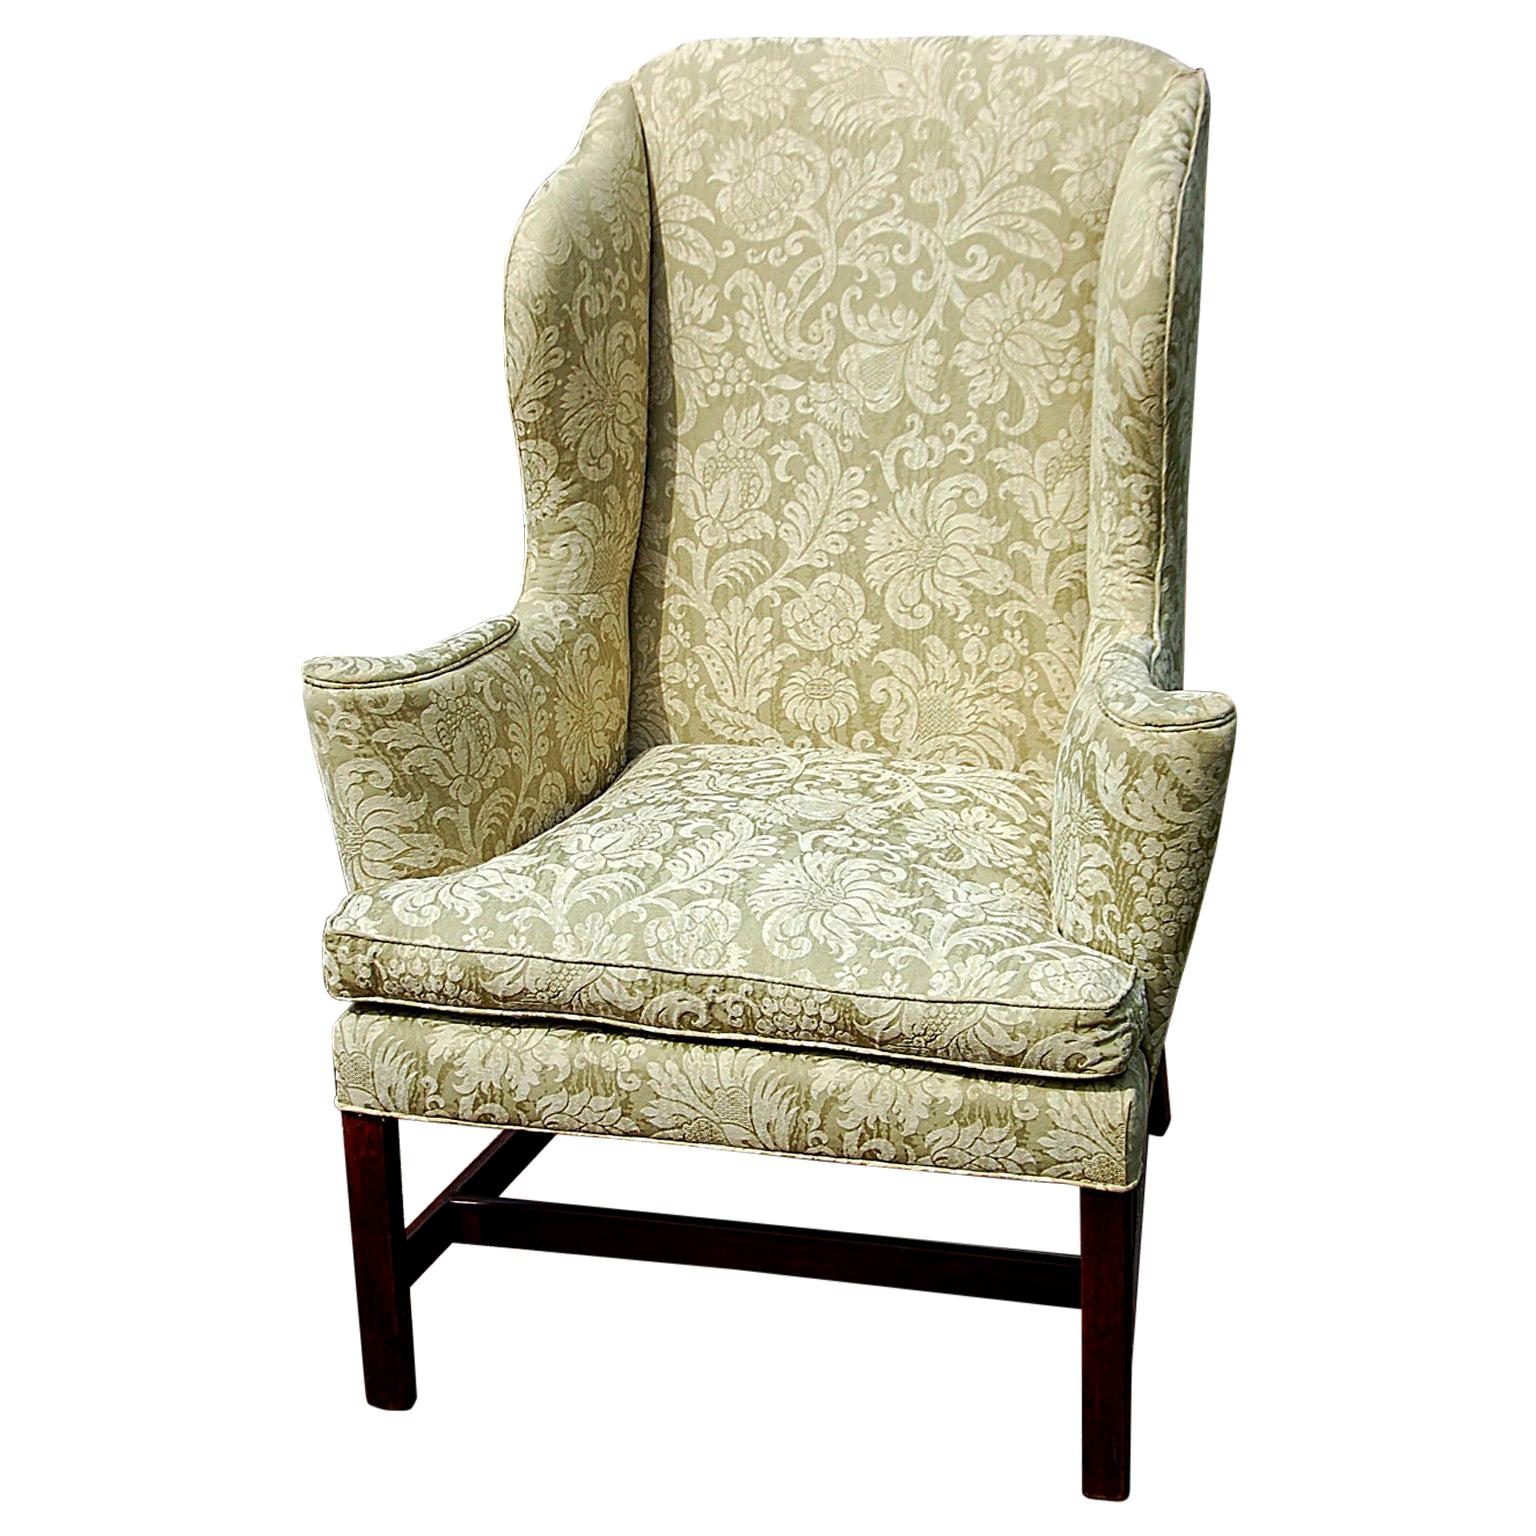 English Georgian Period Chippendale Mahogany Wing Chair with Square Molded Legs